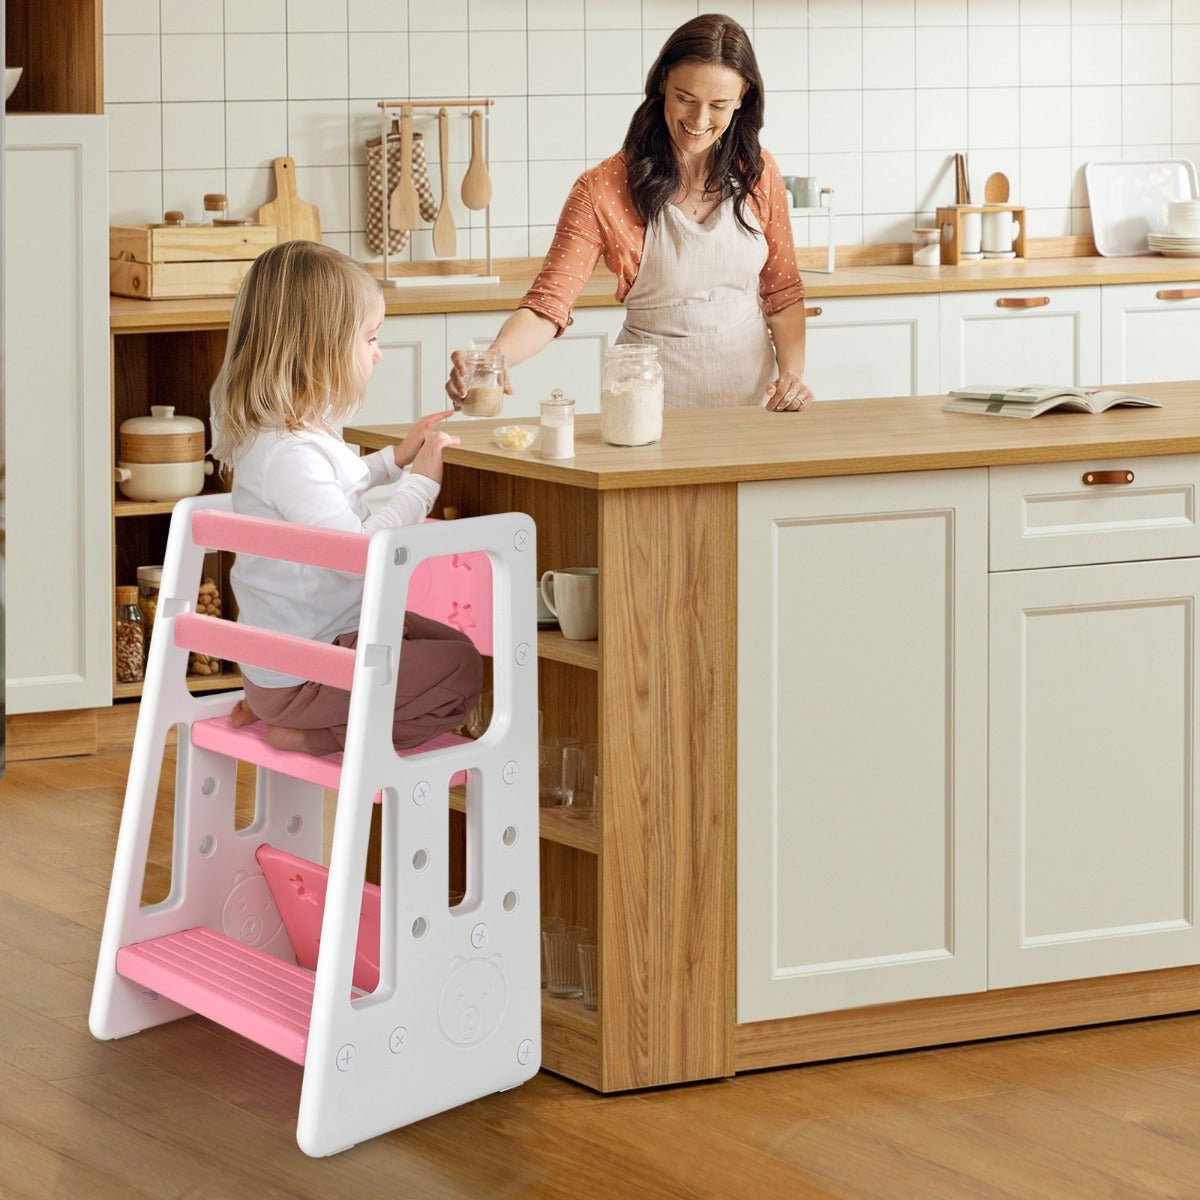 Kids Learning Stool - Double Safety Rails - Promote Self-Reliance